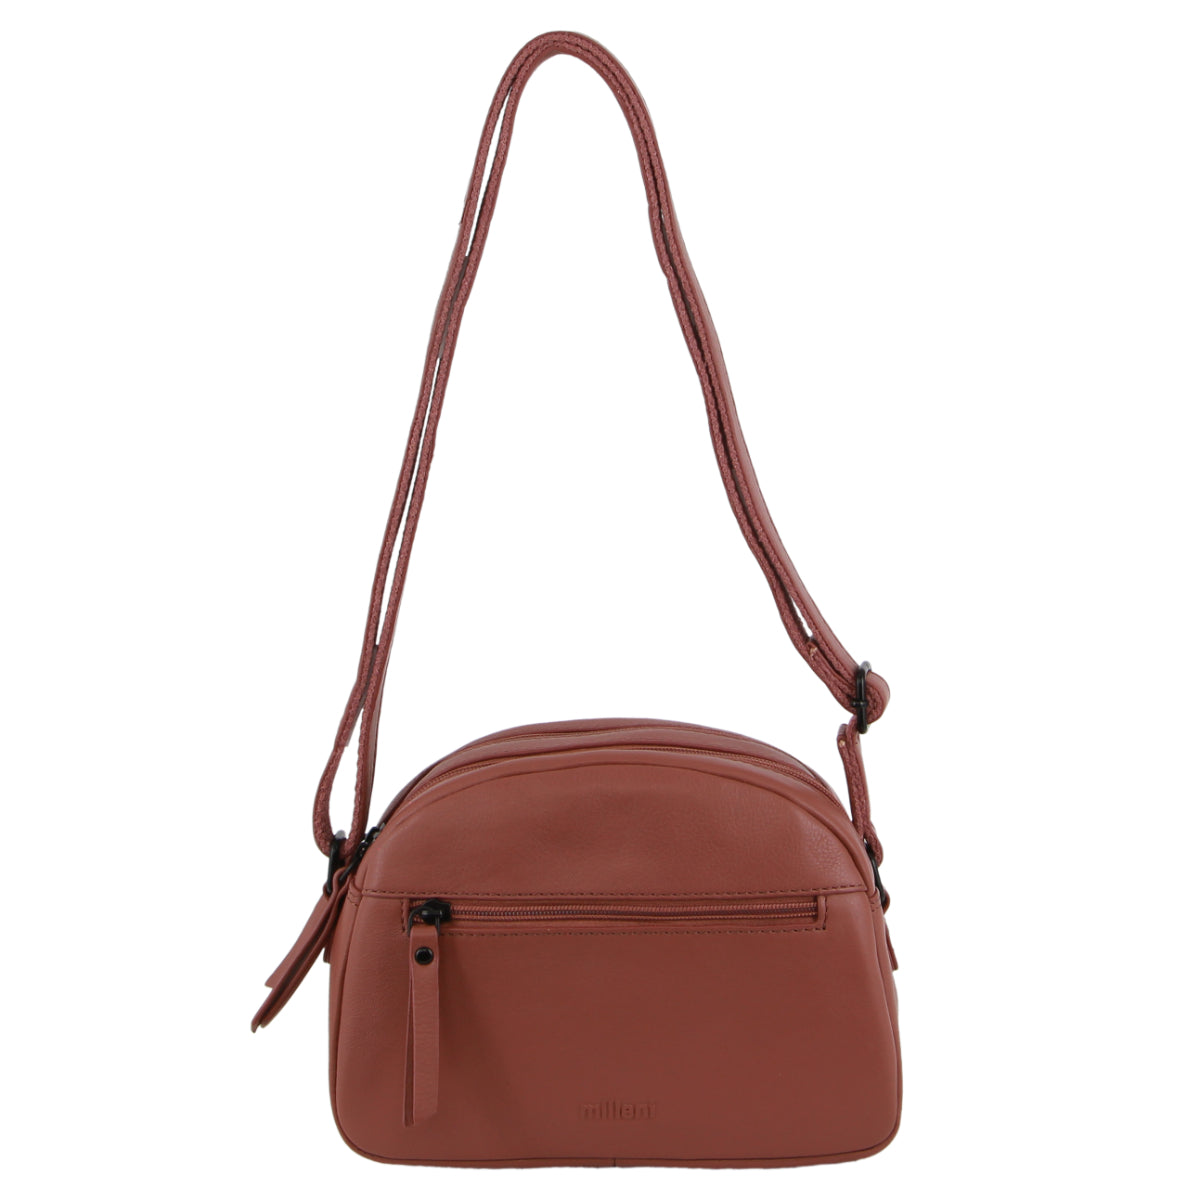 Milleni - NL3869 Small rounded leather sidebag - Rose